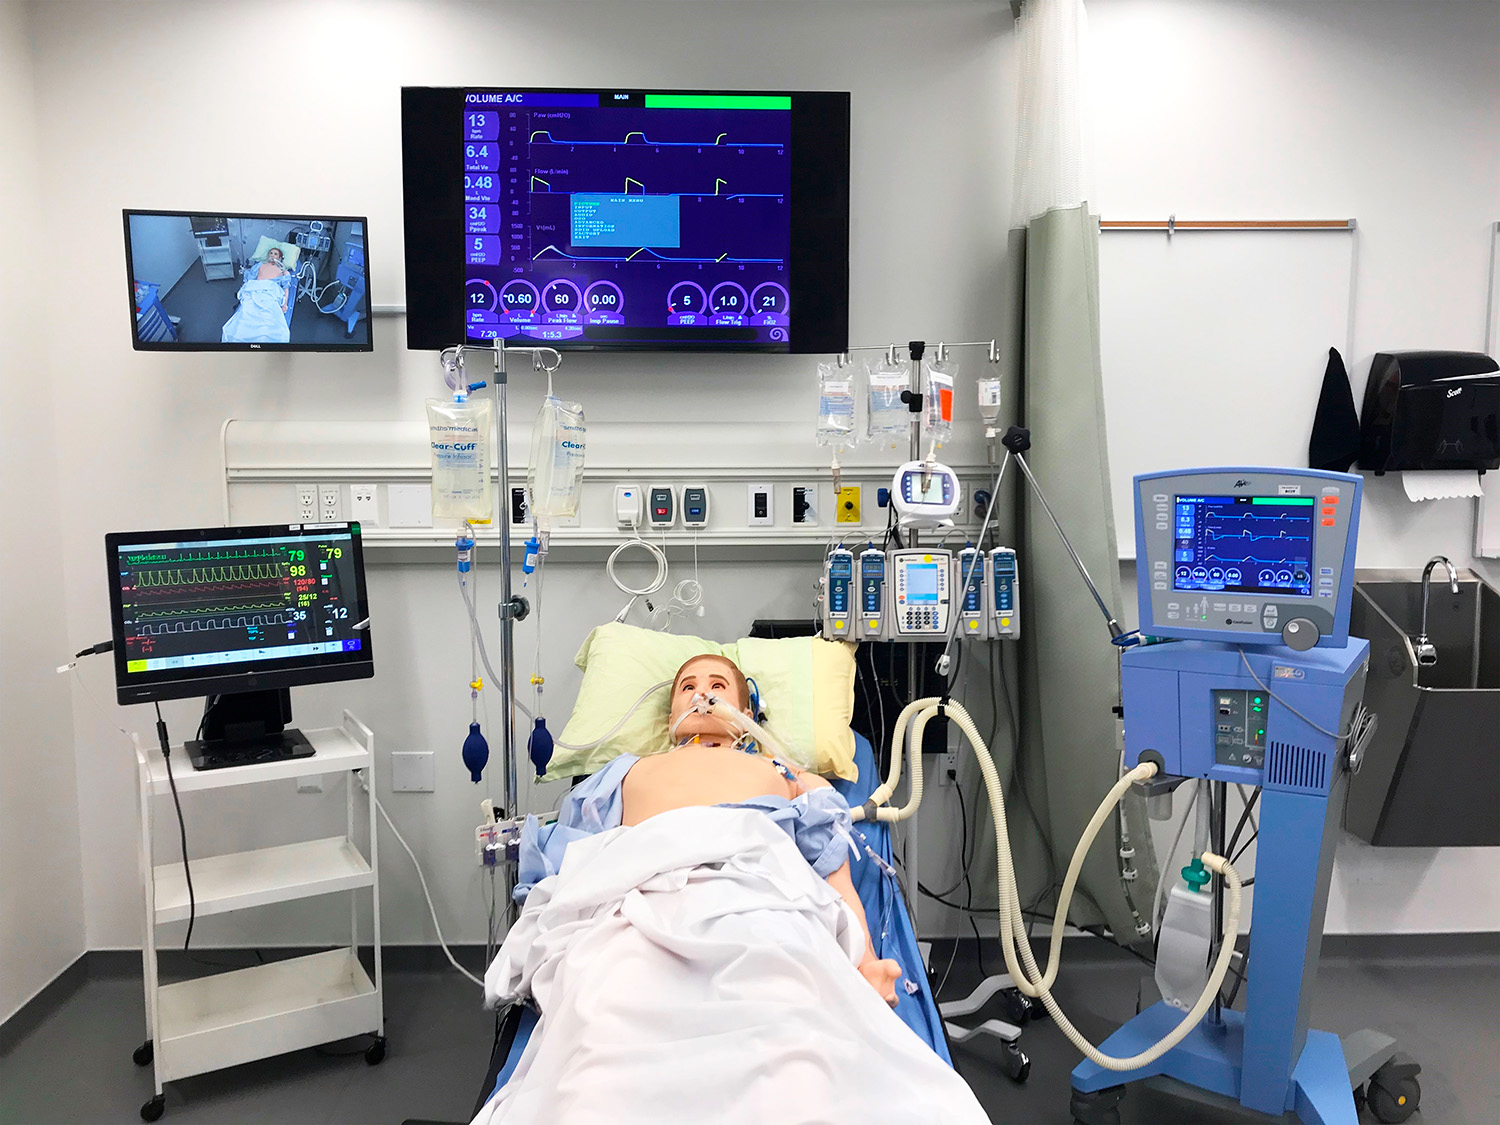 Lab bed stations feature a myriad of medical and AV equipment and a human patient simulator with interactive AV capabilities.